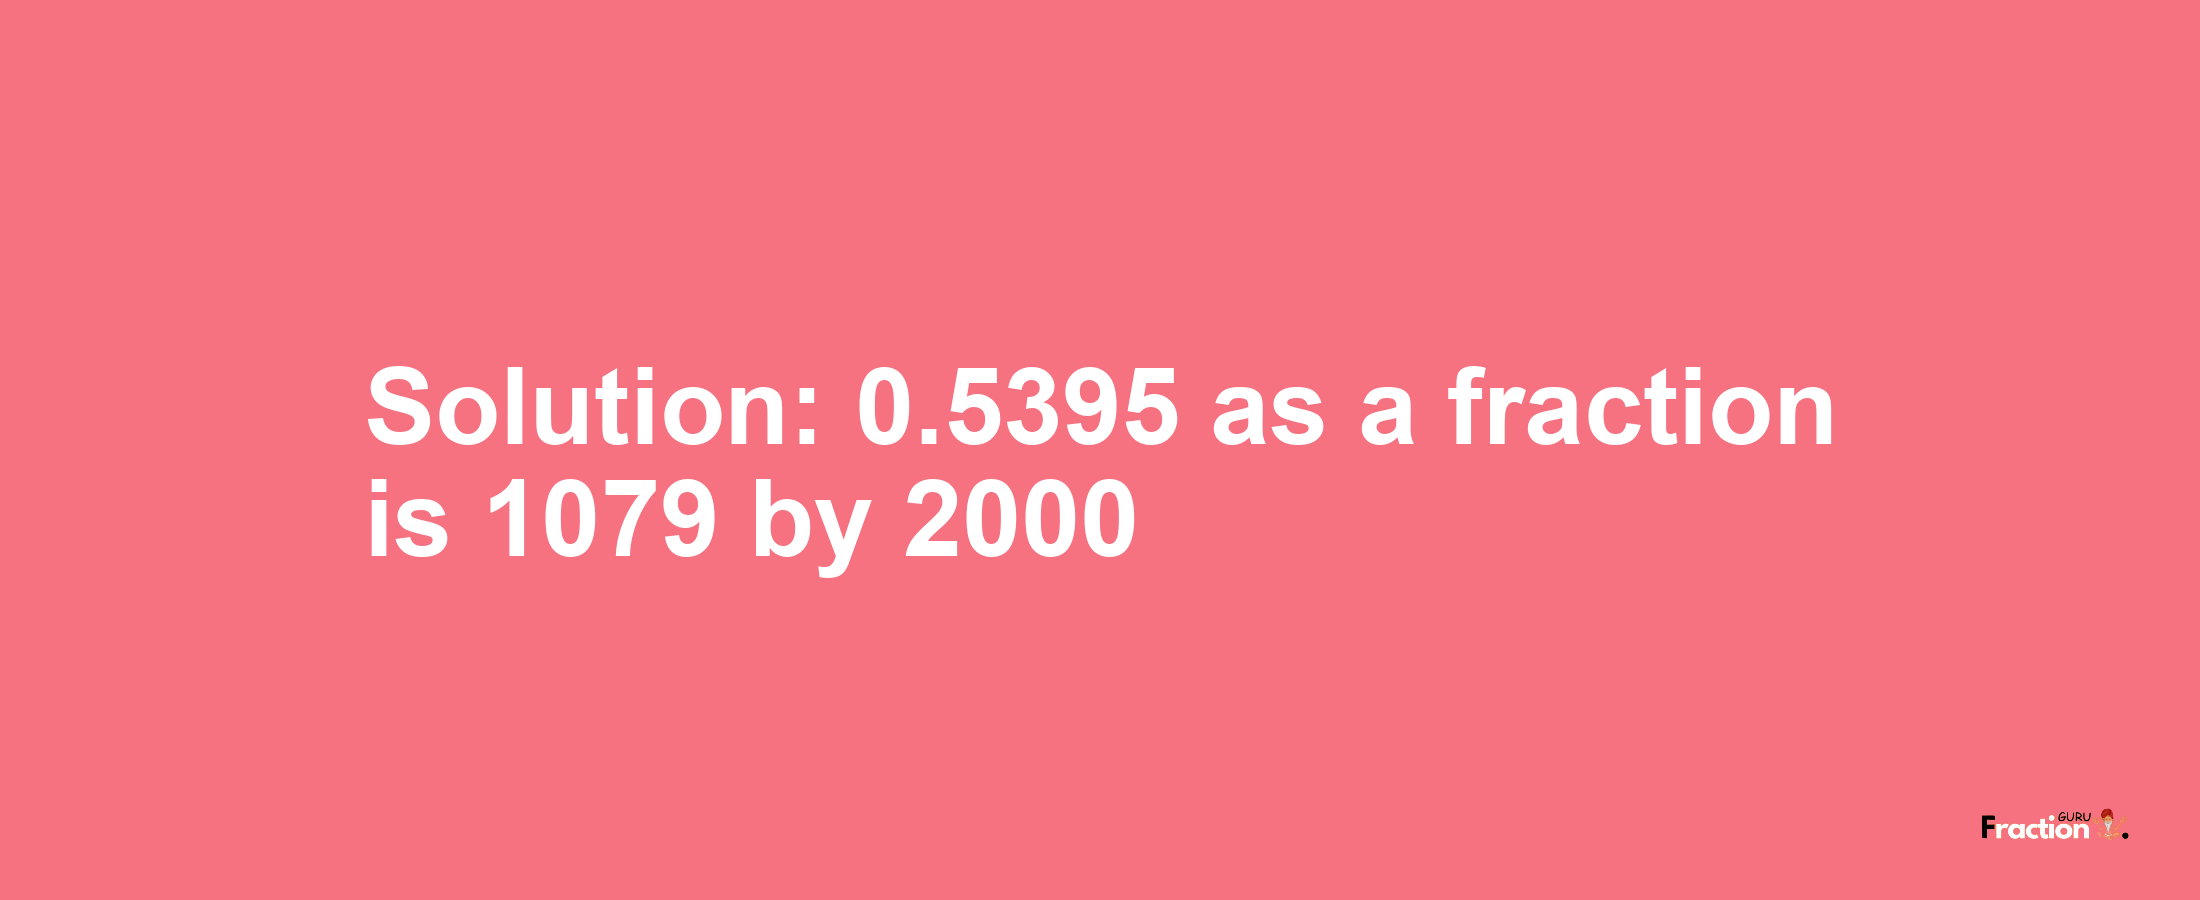 Solution:0.5395 as a fraction is 1079/2000